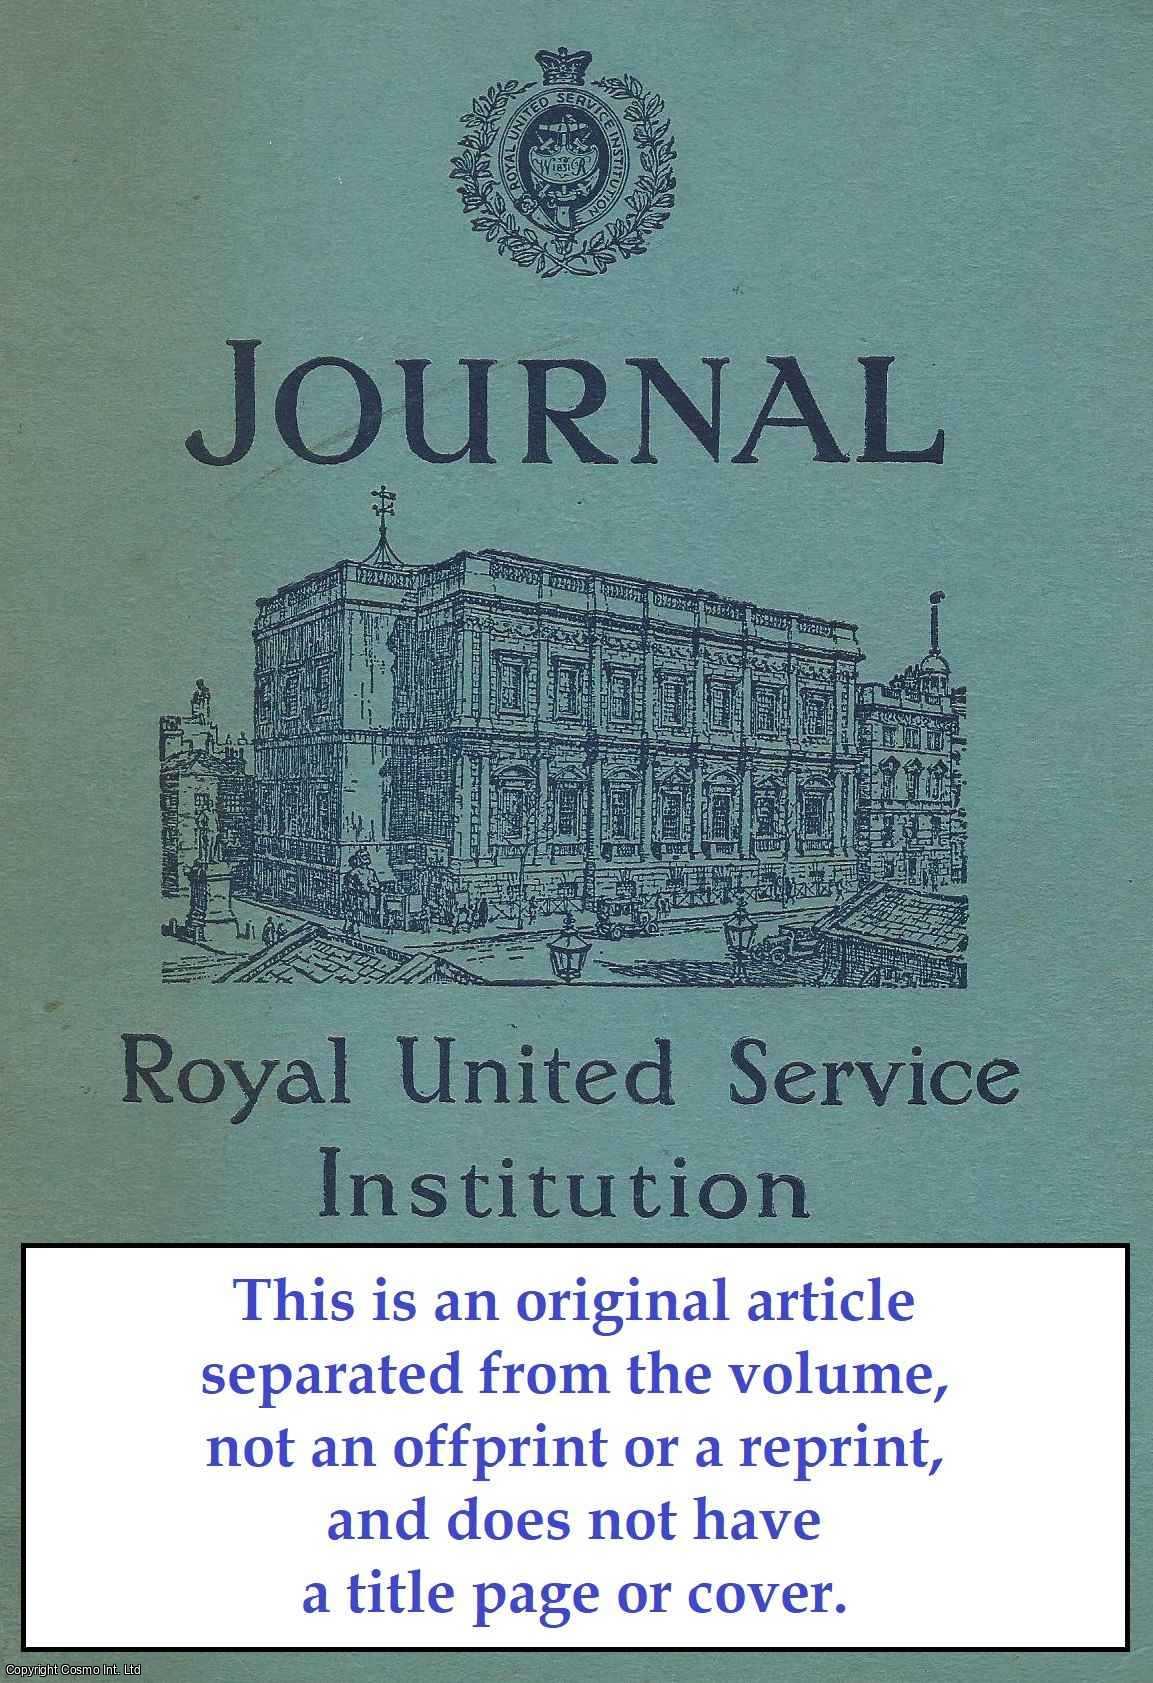 A. Gwynne Jones - The Nature of The Communist Threat. An original article from Journal of The Royal United Service Institution, 1958.